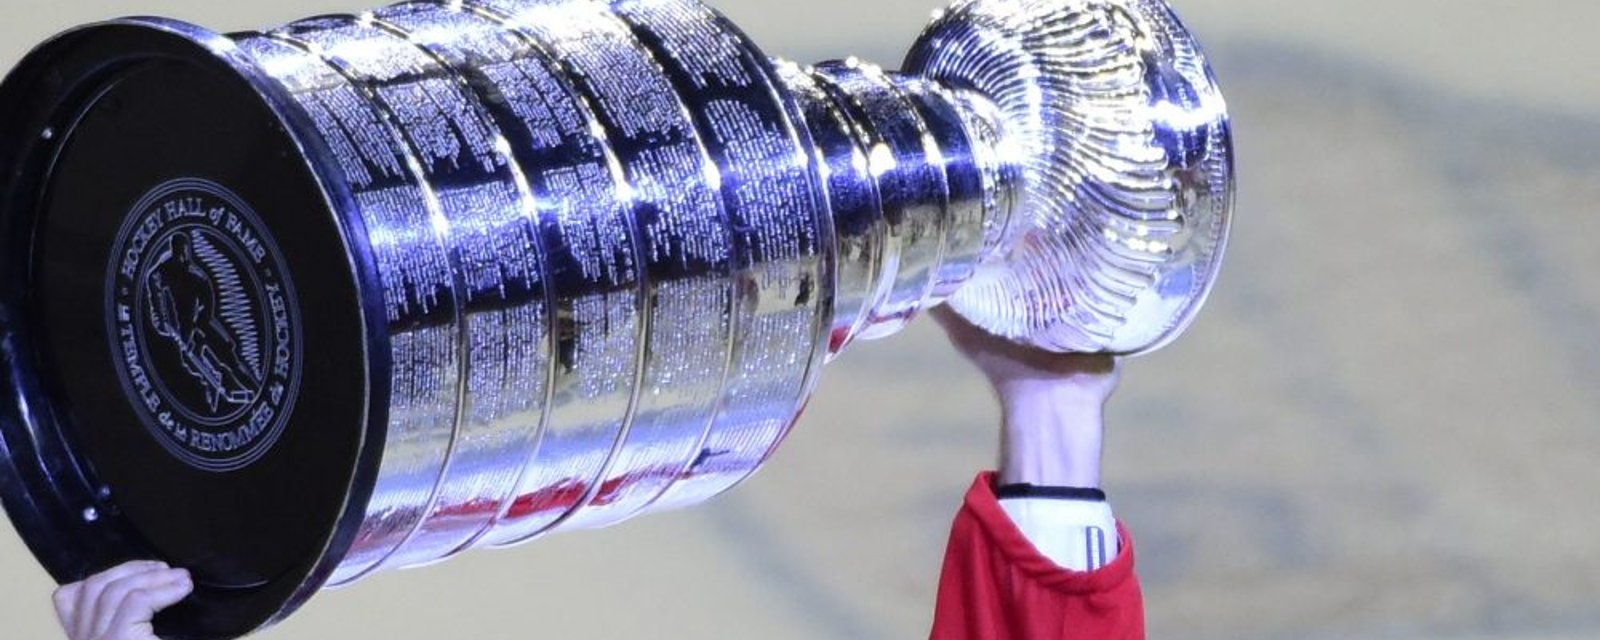 The official Stanley Cup final schedule revealed! 